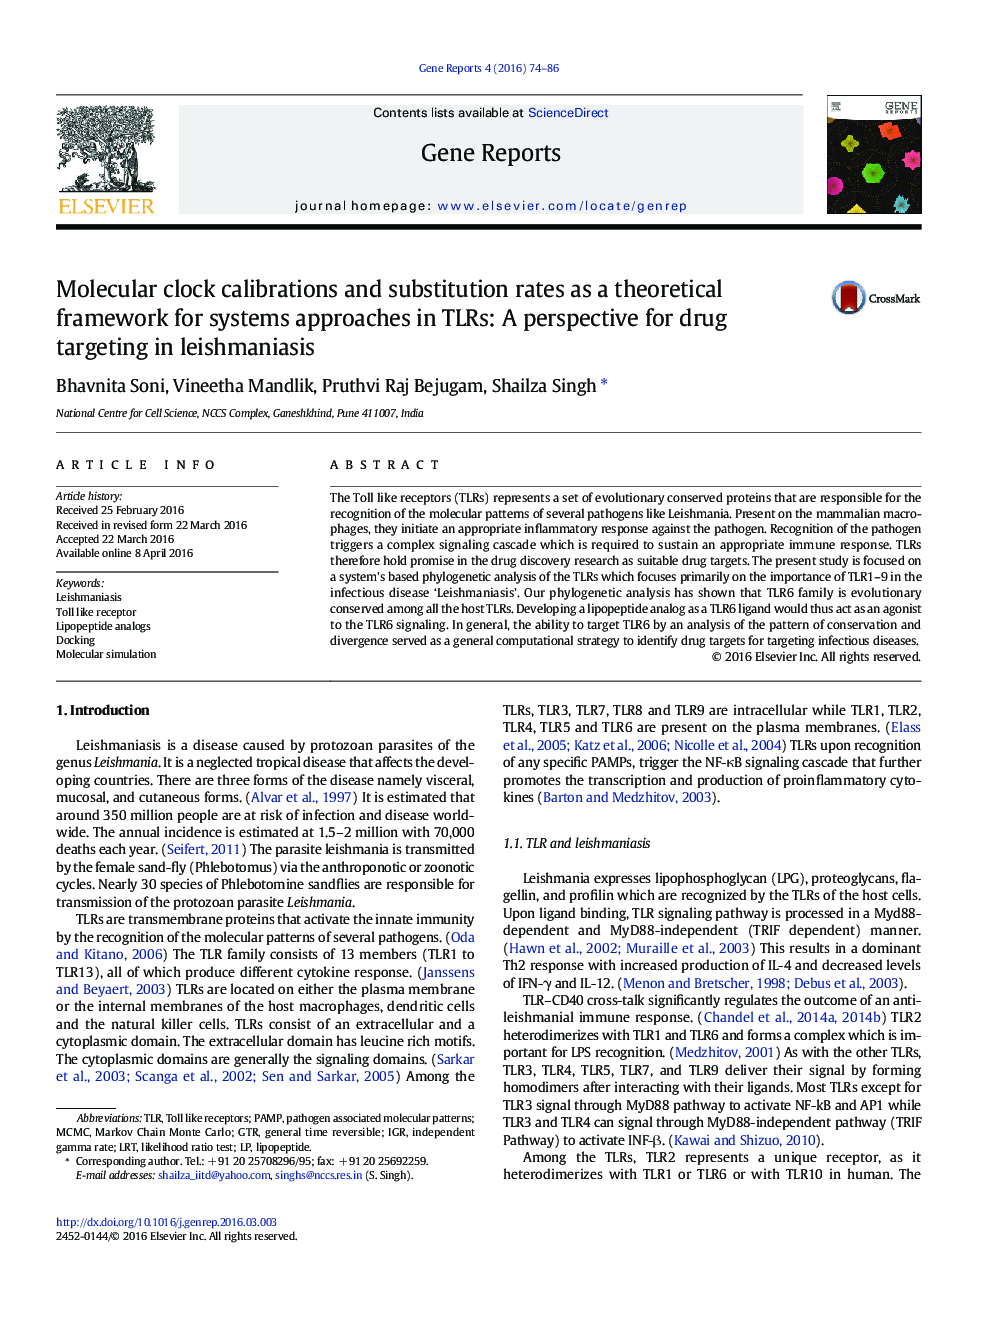 Molecular clock calibrations and substitution rates as a theoretical framework for systems approaches in TLRs: A perspective for drug targeting in leishmaniasis